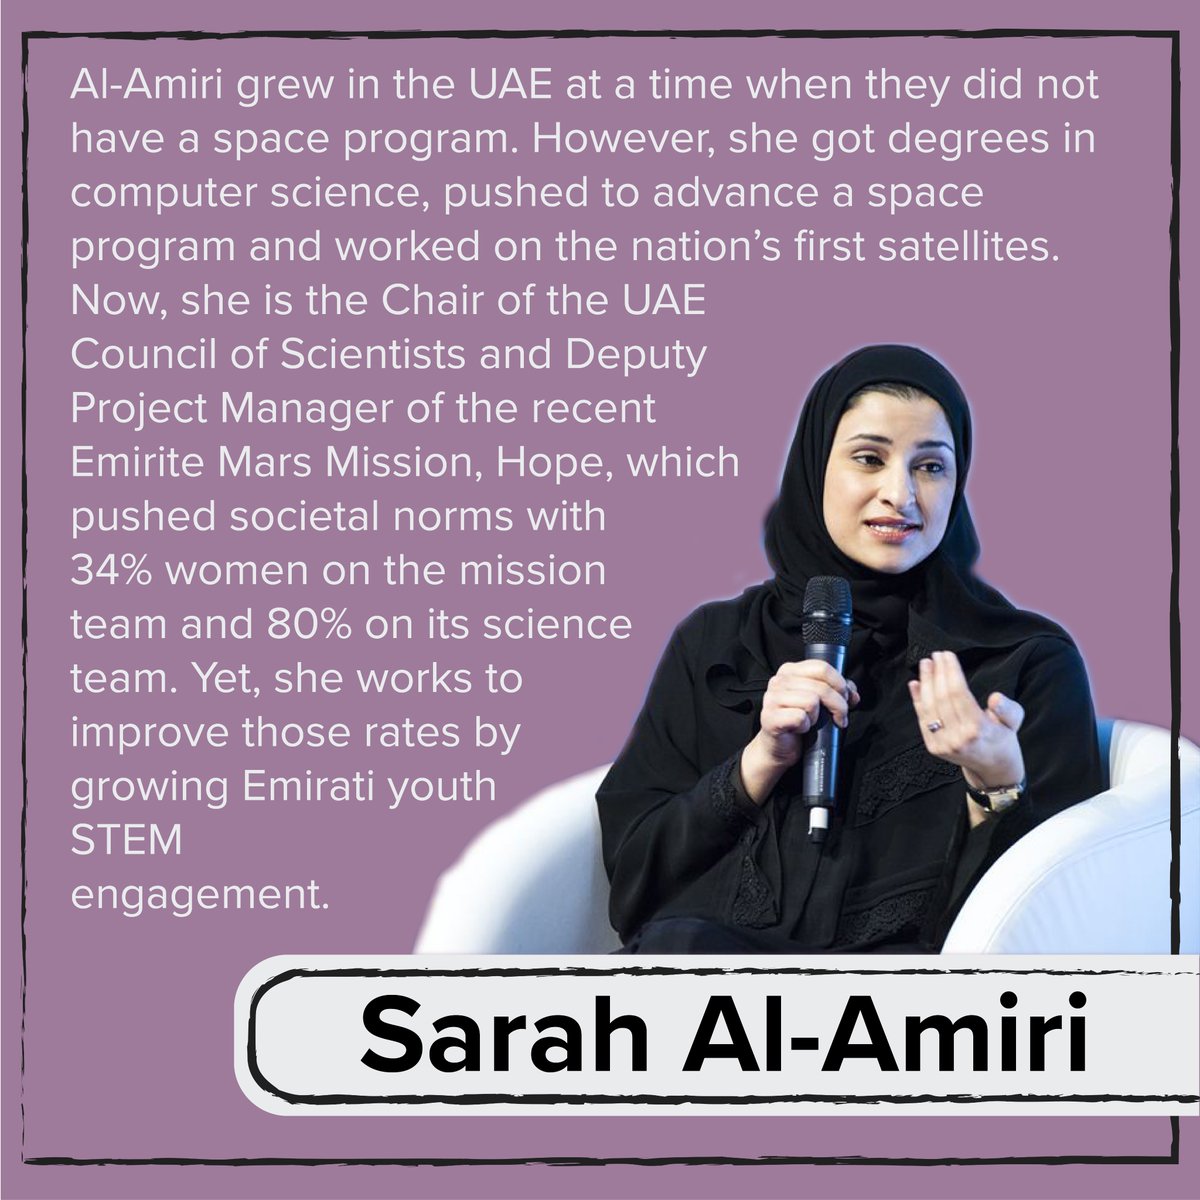  @SarahAmiri1 when the UAE did not have a space program. However, she still worked diligently and became a leader in the  @uaespaceagency. She managed the recent Emirite Mars Mission and continues to serve as a role model for space-dreaming women in the Middle East.